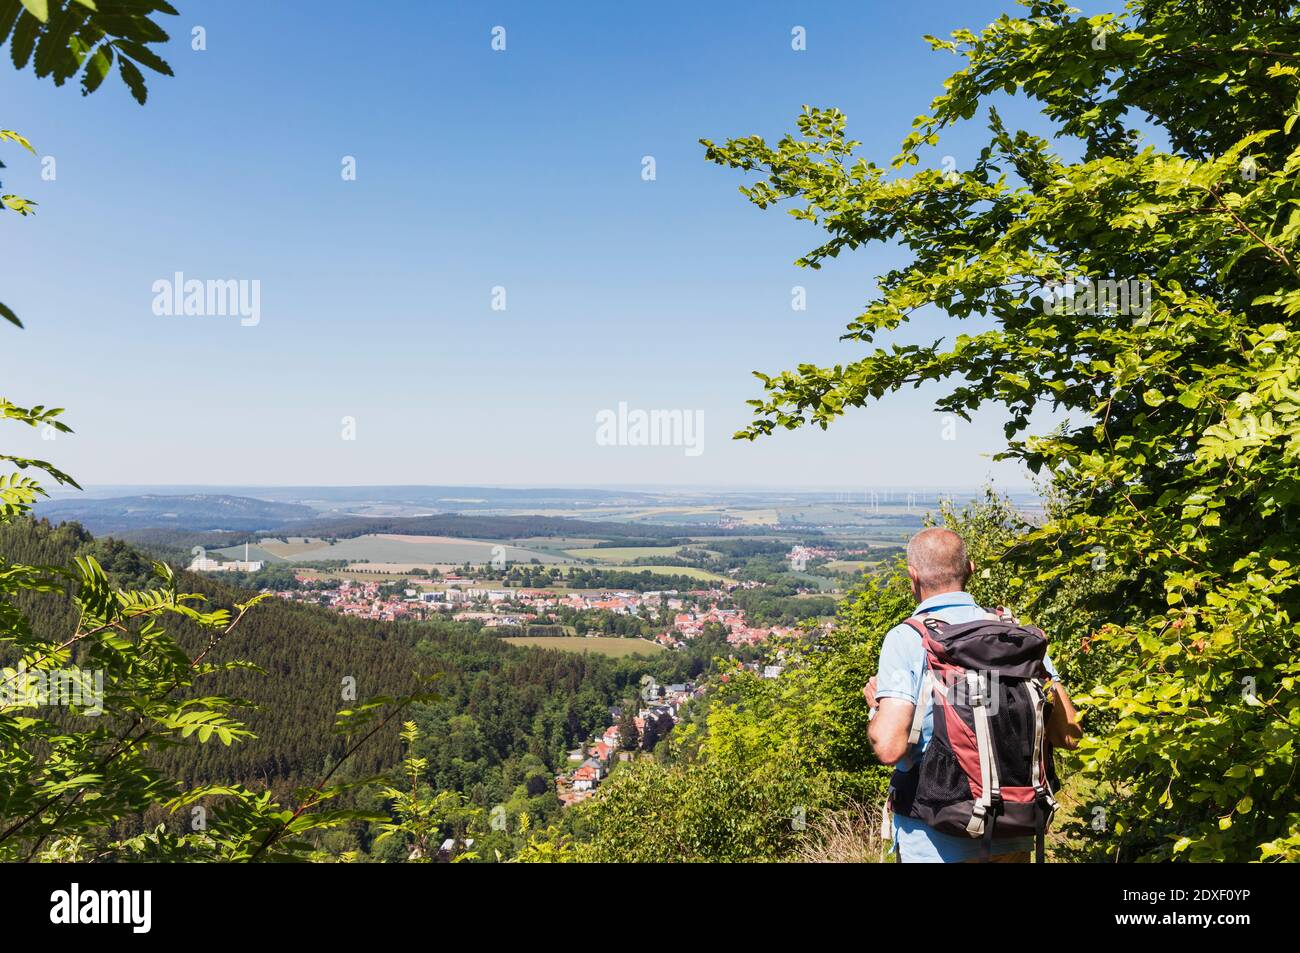 Germany, Thuringia, Bad Tabarz, Senior hiker admiring view of town in Thuringian Forest during spring Stock Photo